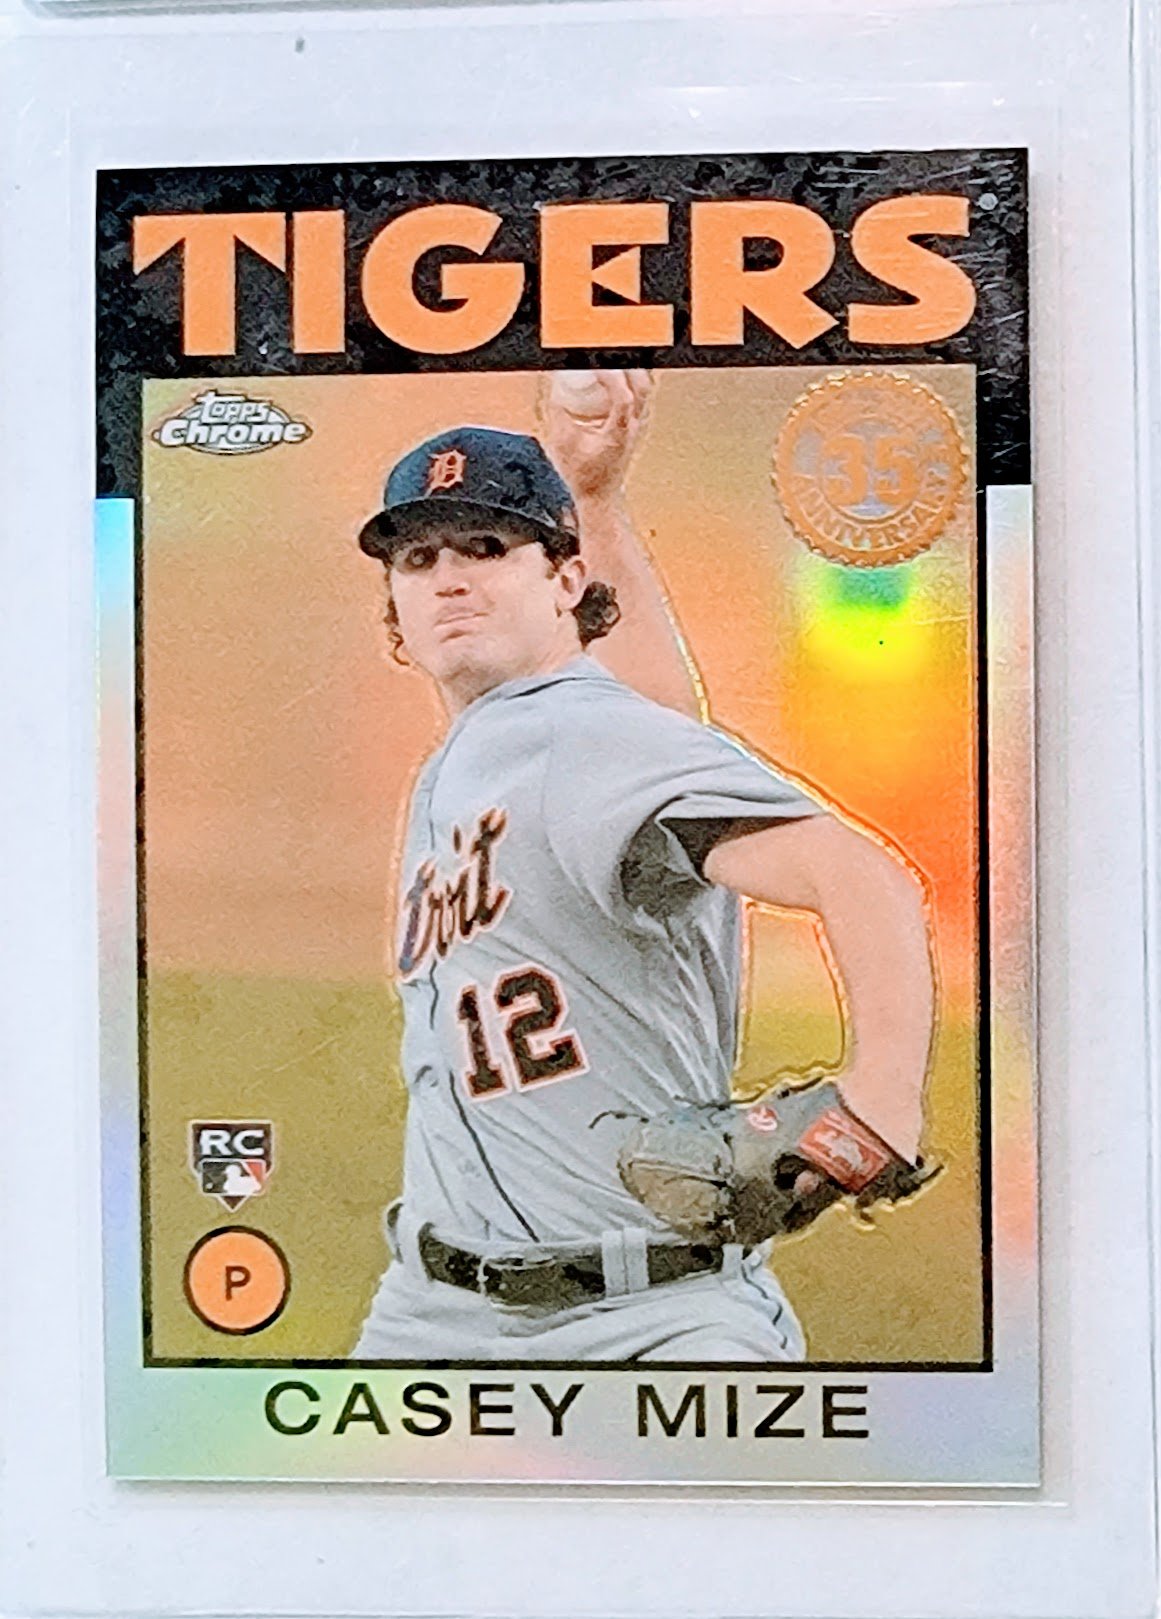 2021 Topps Chrome Update Casey Mize 1985 Anniversary Rookie Refractor Baseball Card TPTV simple Xclusive Collectibles   